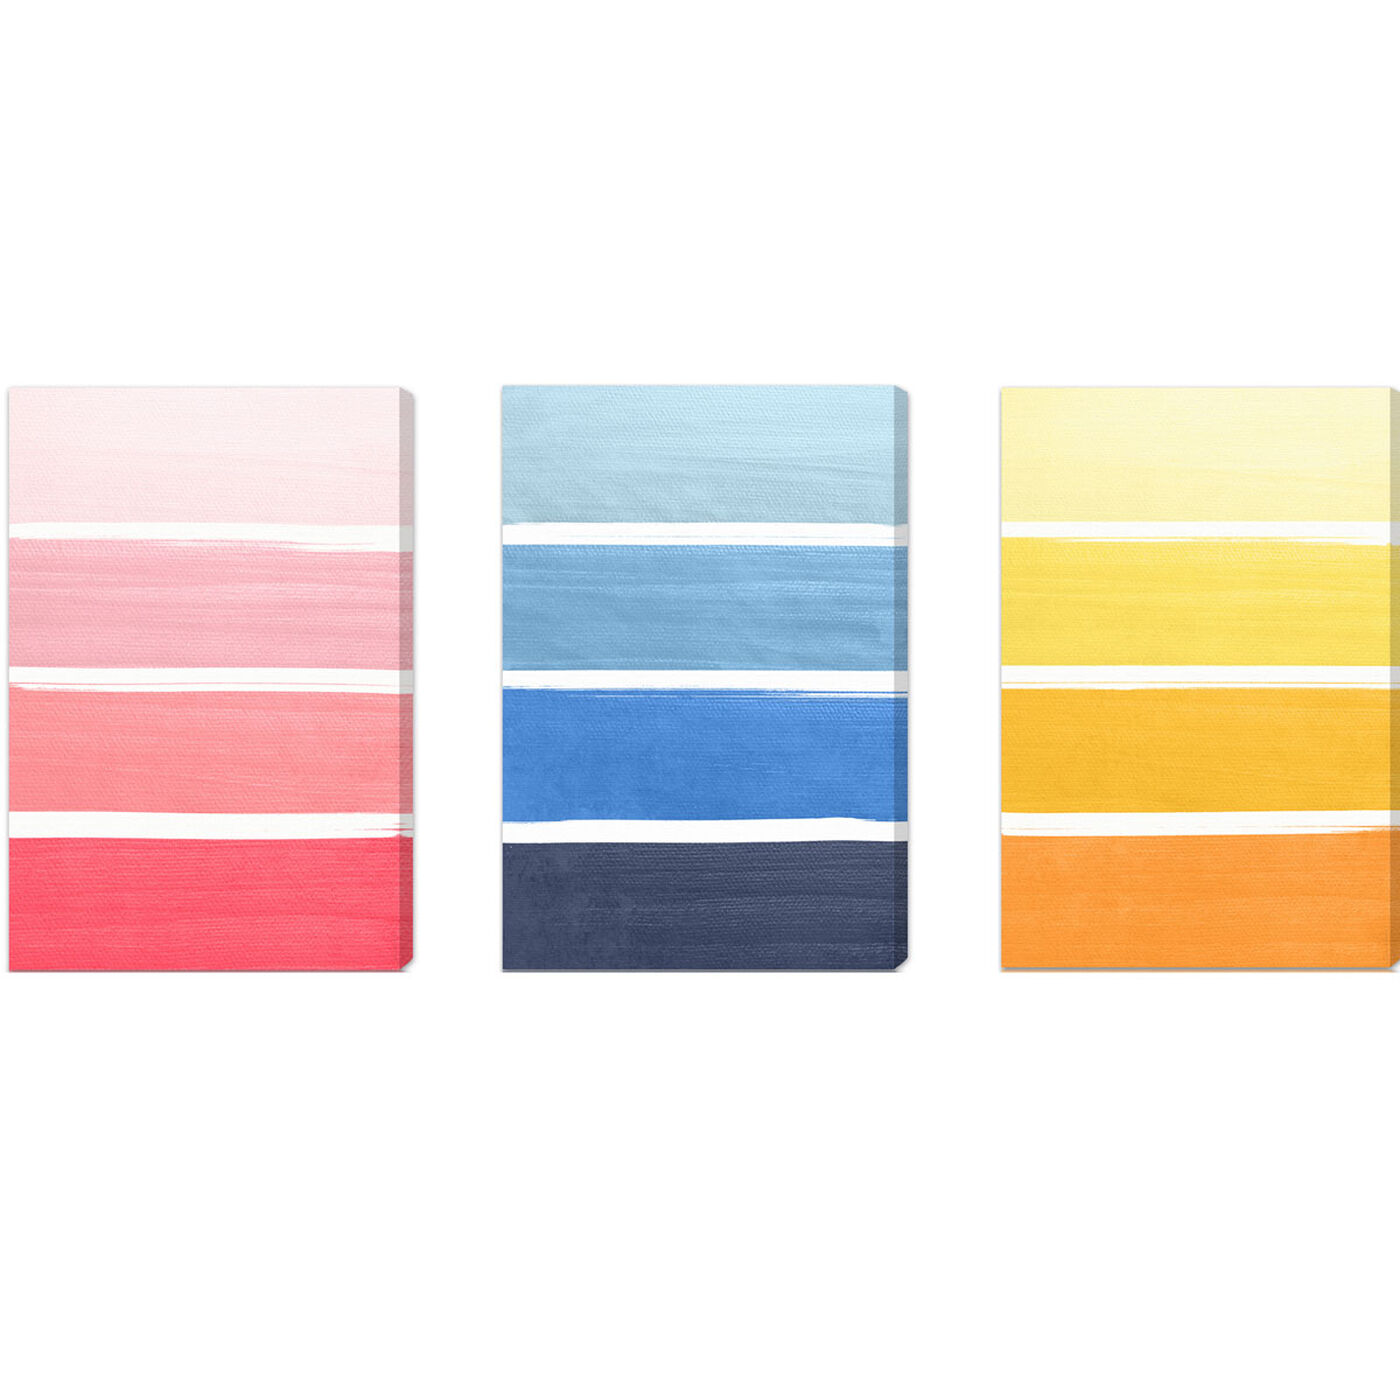 Color Studies Set: Pink, Blue and Yellow